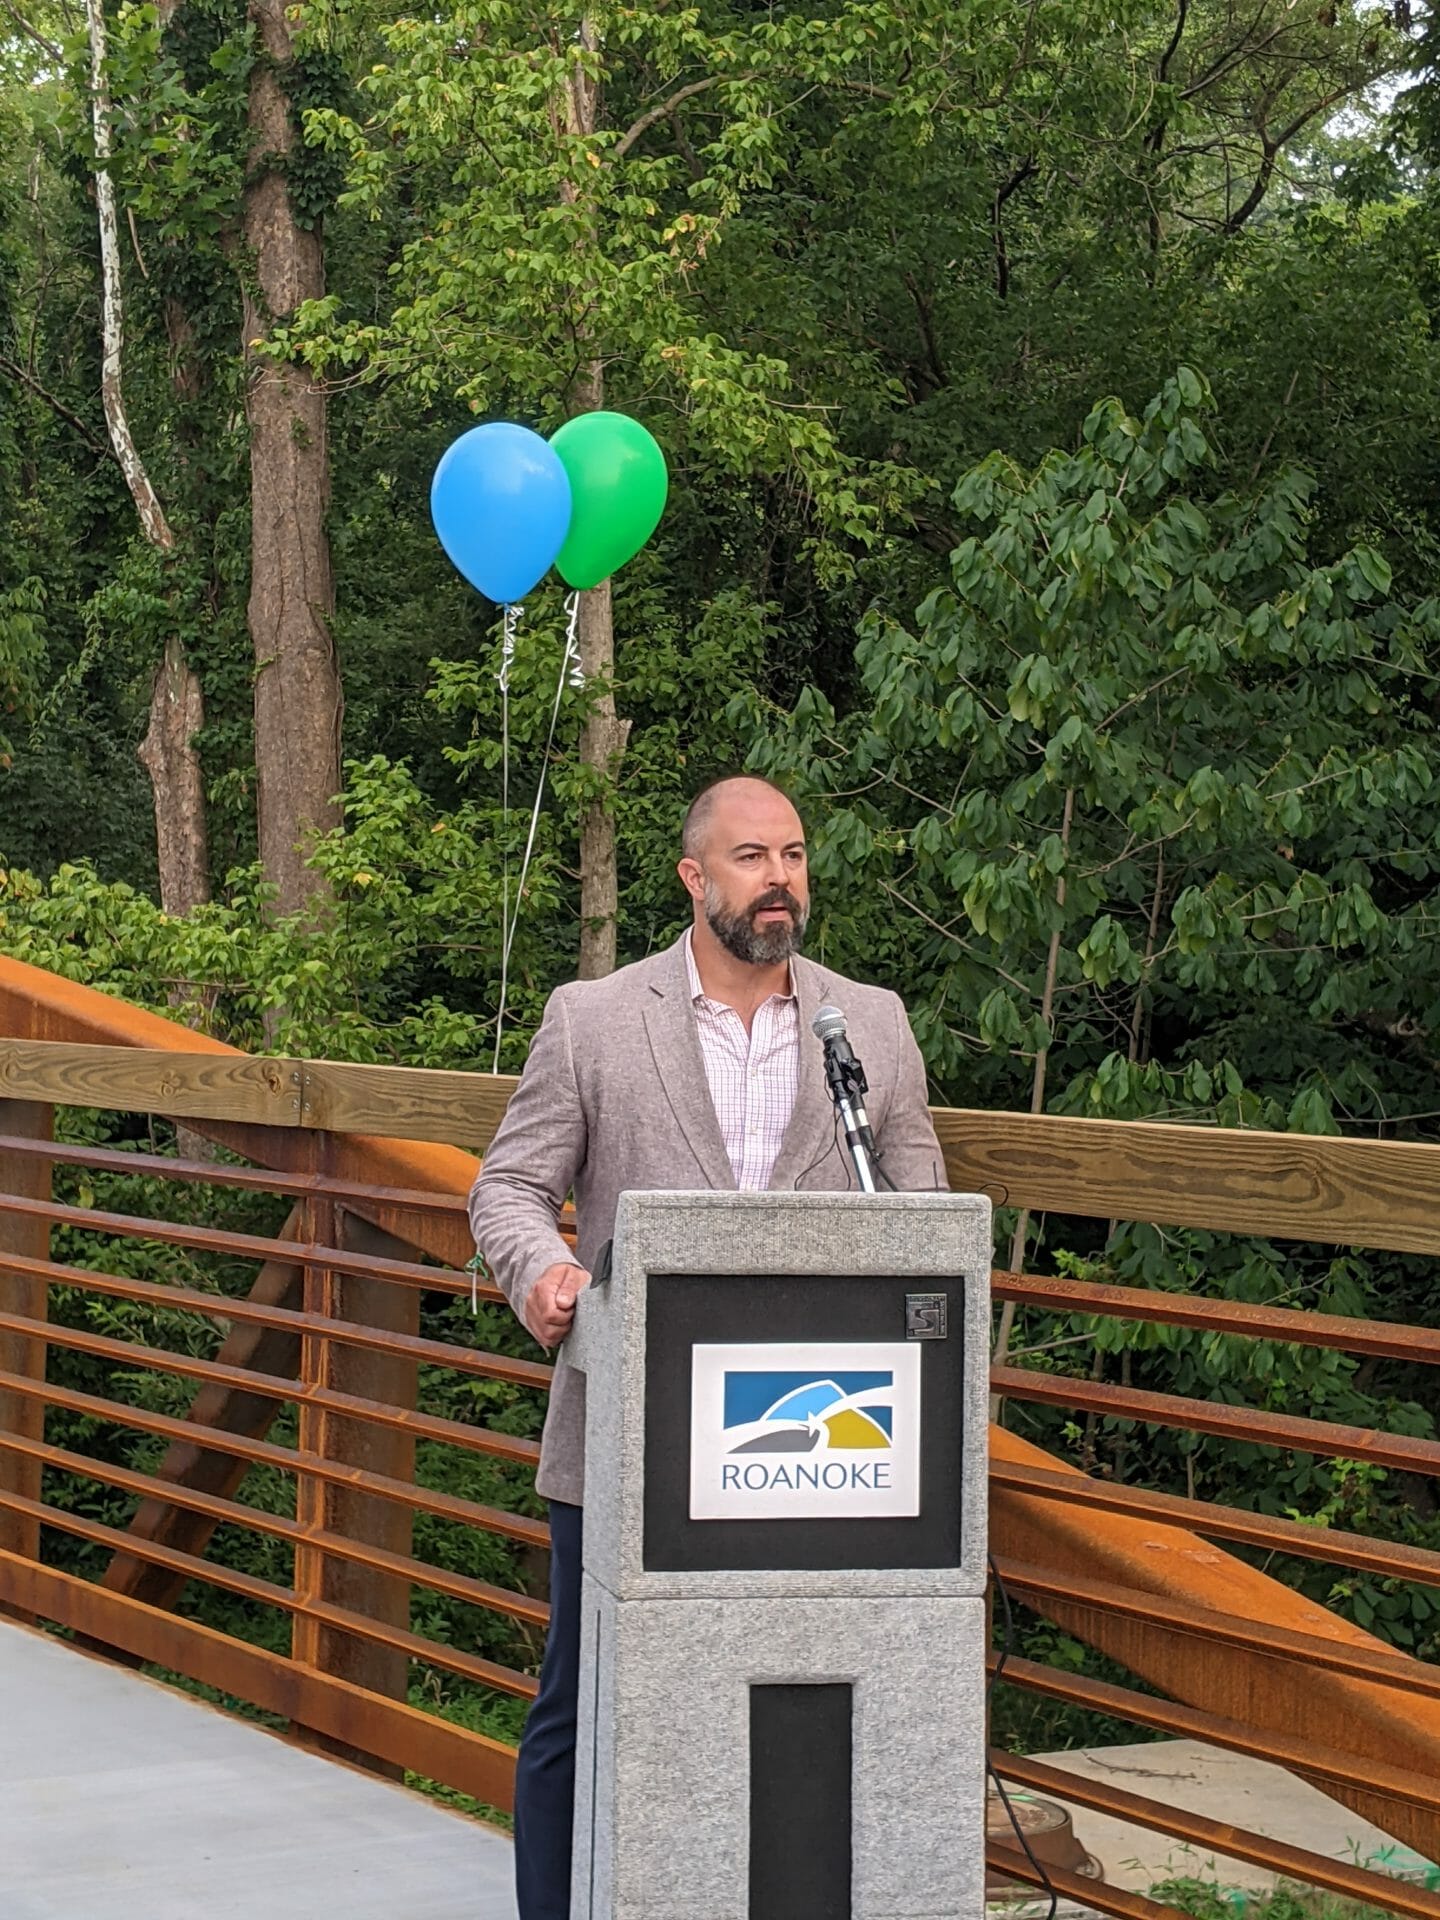 White man speaking at a podium outside with blue and green balloons in the background 